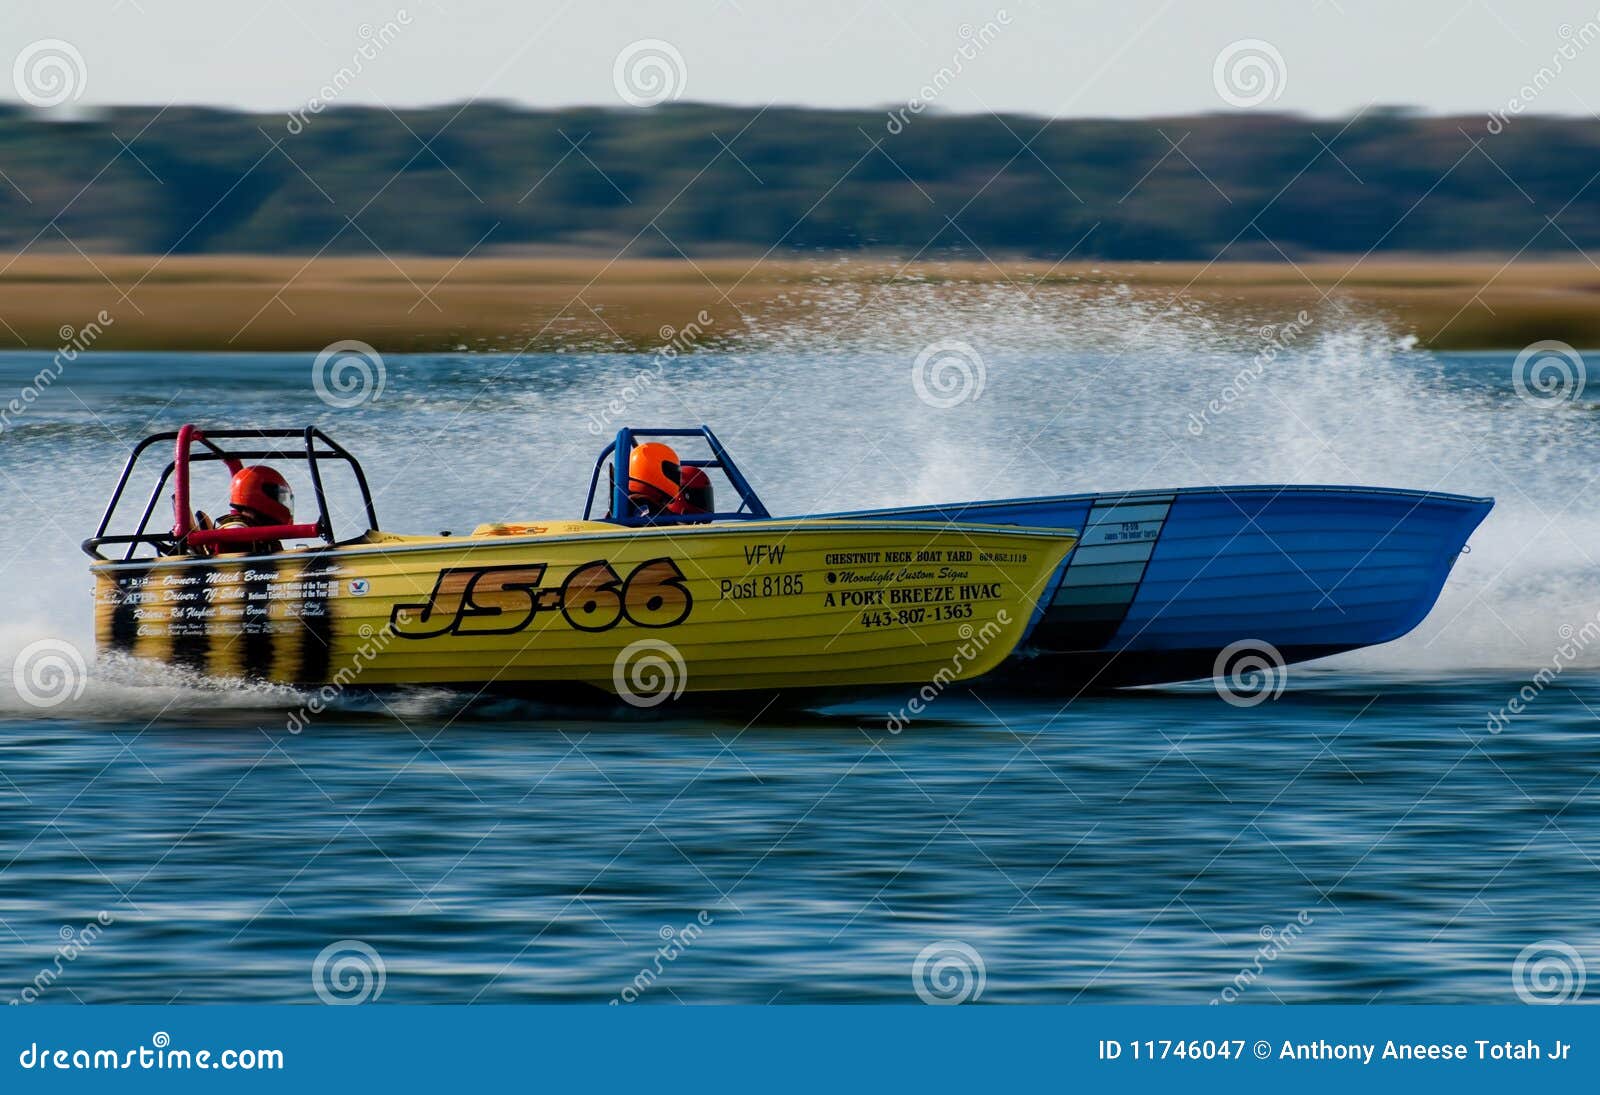 jersey speed skiff editorial photography. image of island